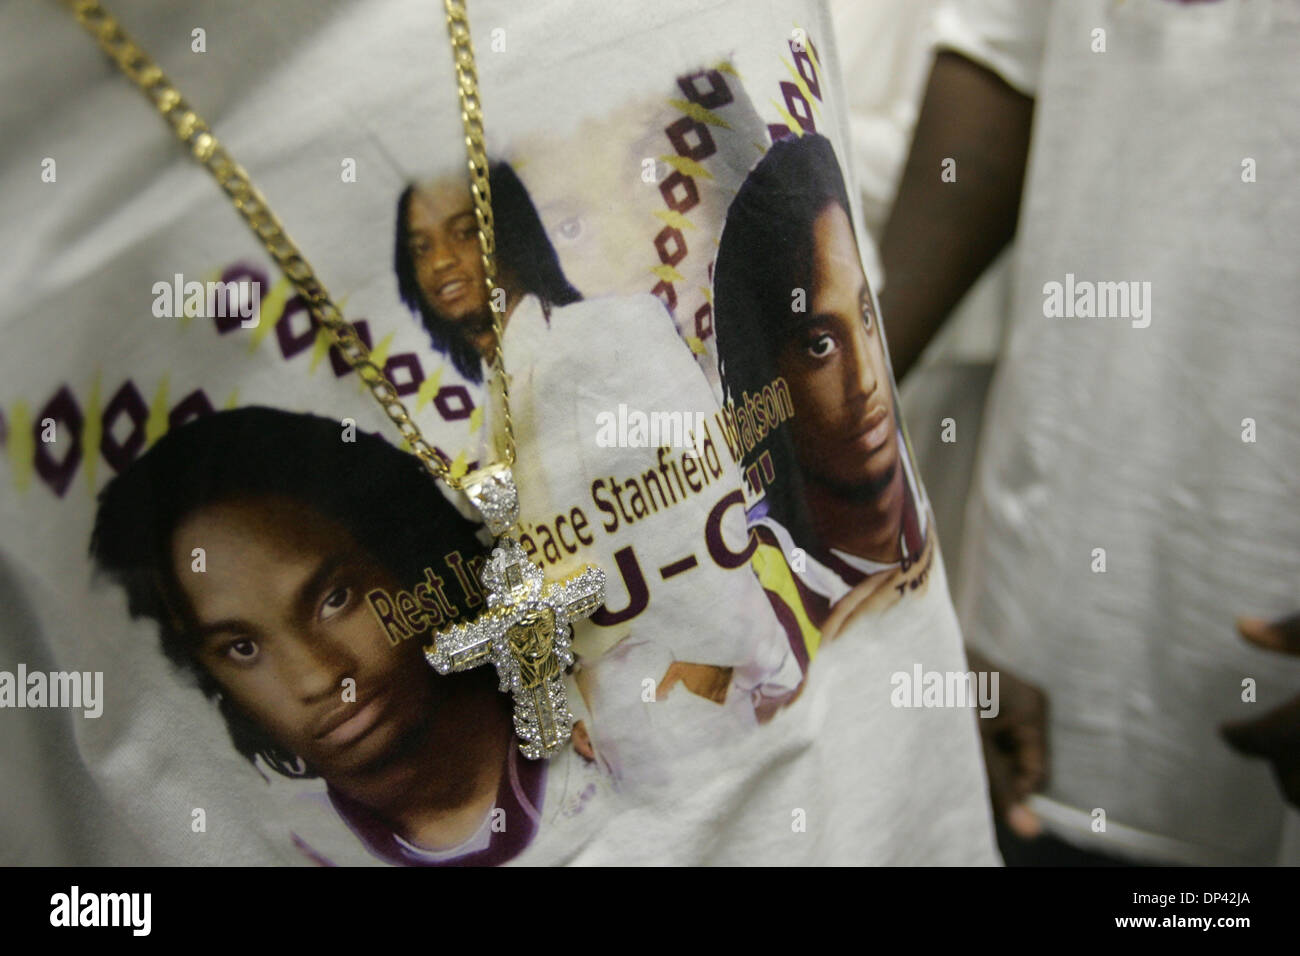 Jul 22, 2006; Belle Glade, FL, USA; T-shirts worn by the Game Room Boyz commemorate Stanfield S. Watson, Jr..  Watson was a member of the close knit group of friends. The Game Room Boyz presented Watson's mother, Mae Delores Campbell-Harrison, with a T-shirt and they also served as pall bearers. Watson was killed in a car crash last Sunday. Mandatory Credit: Photo by Allen Eyestone Stock Photo